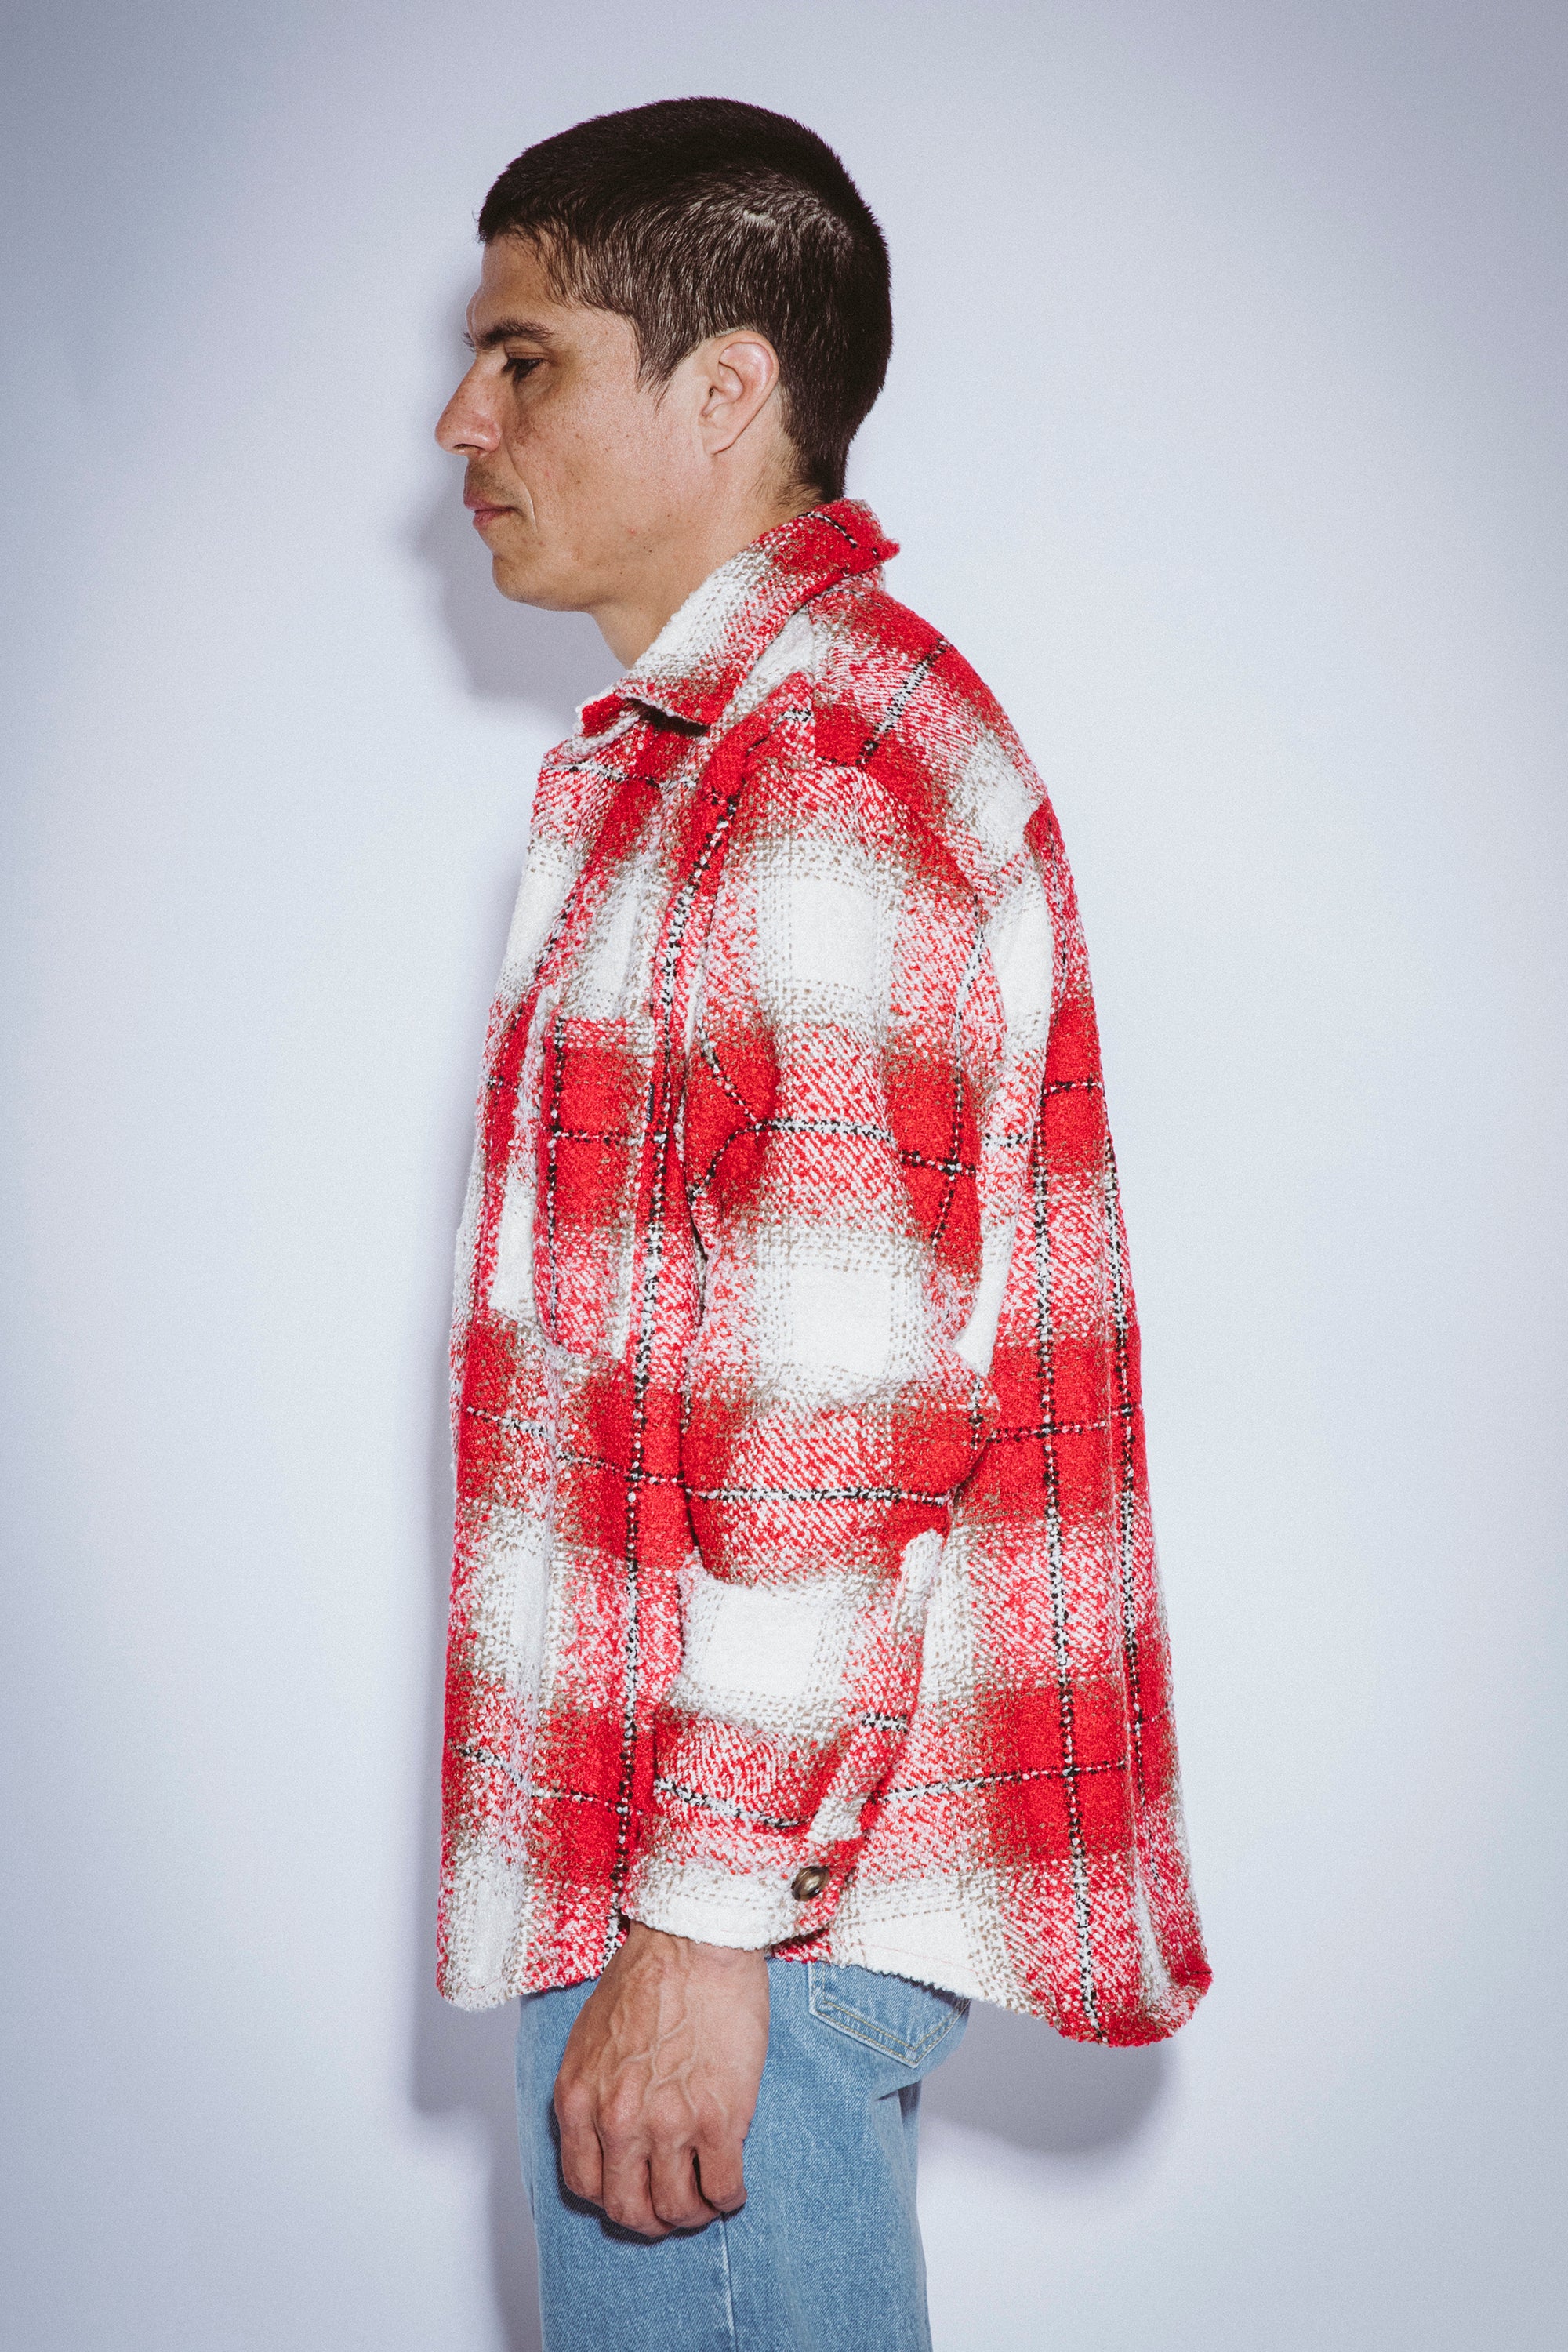 Heavy Flannel Overshirt – Fucking Awesome